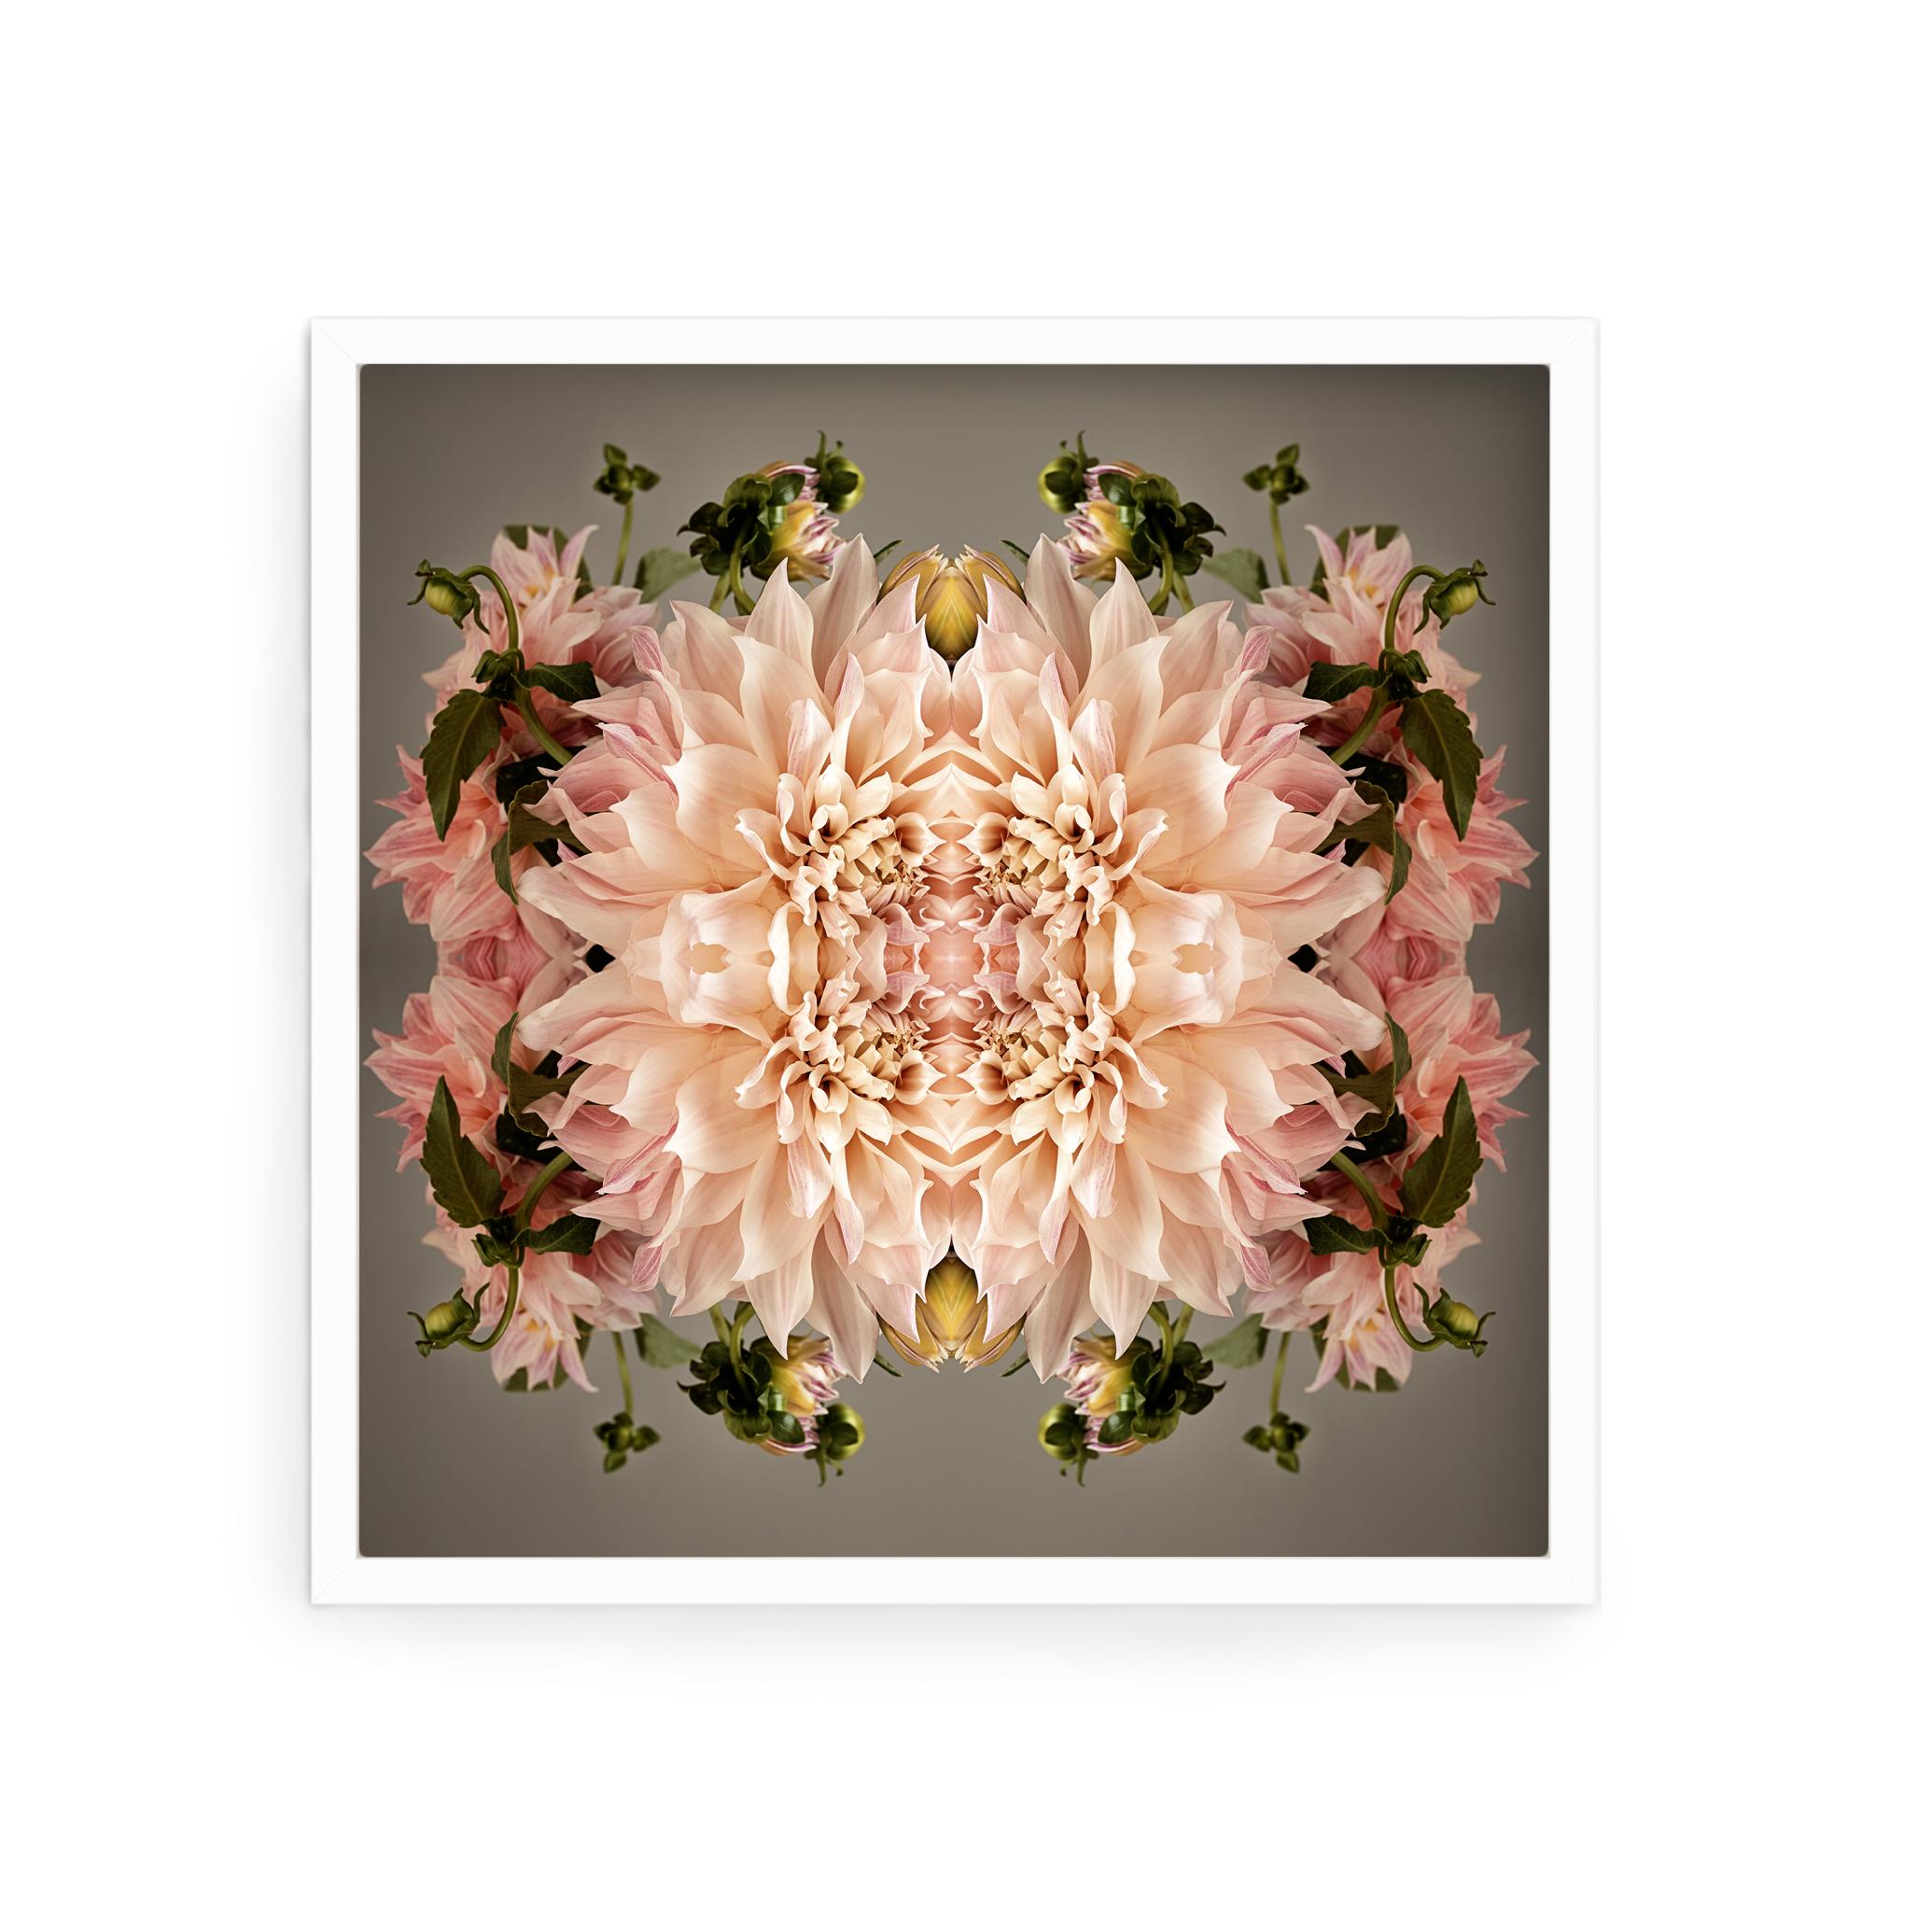 This print features the playful relationship between natural forms and botanicals. In this image Erin uses the natural composition of the pinks, blush and greens of the Peony, and her own collage work, to create a hypnotic mandala with the